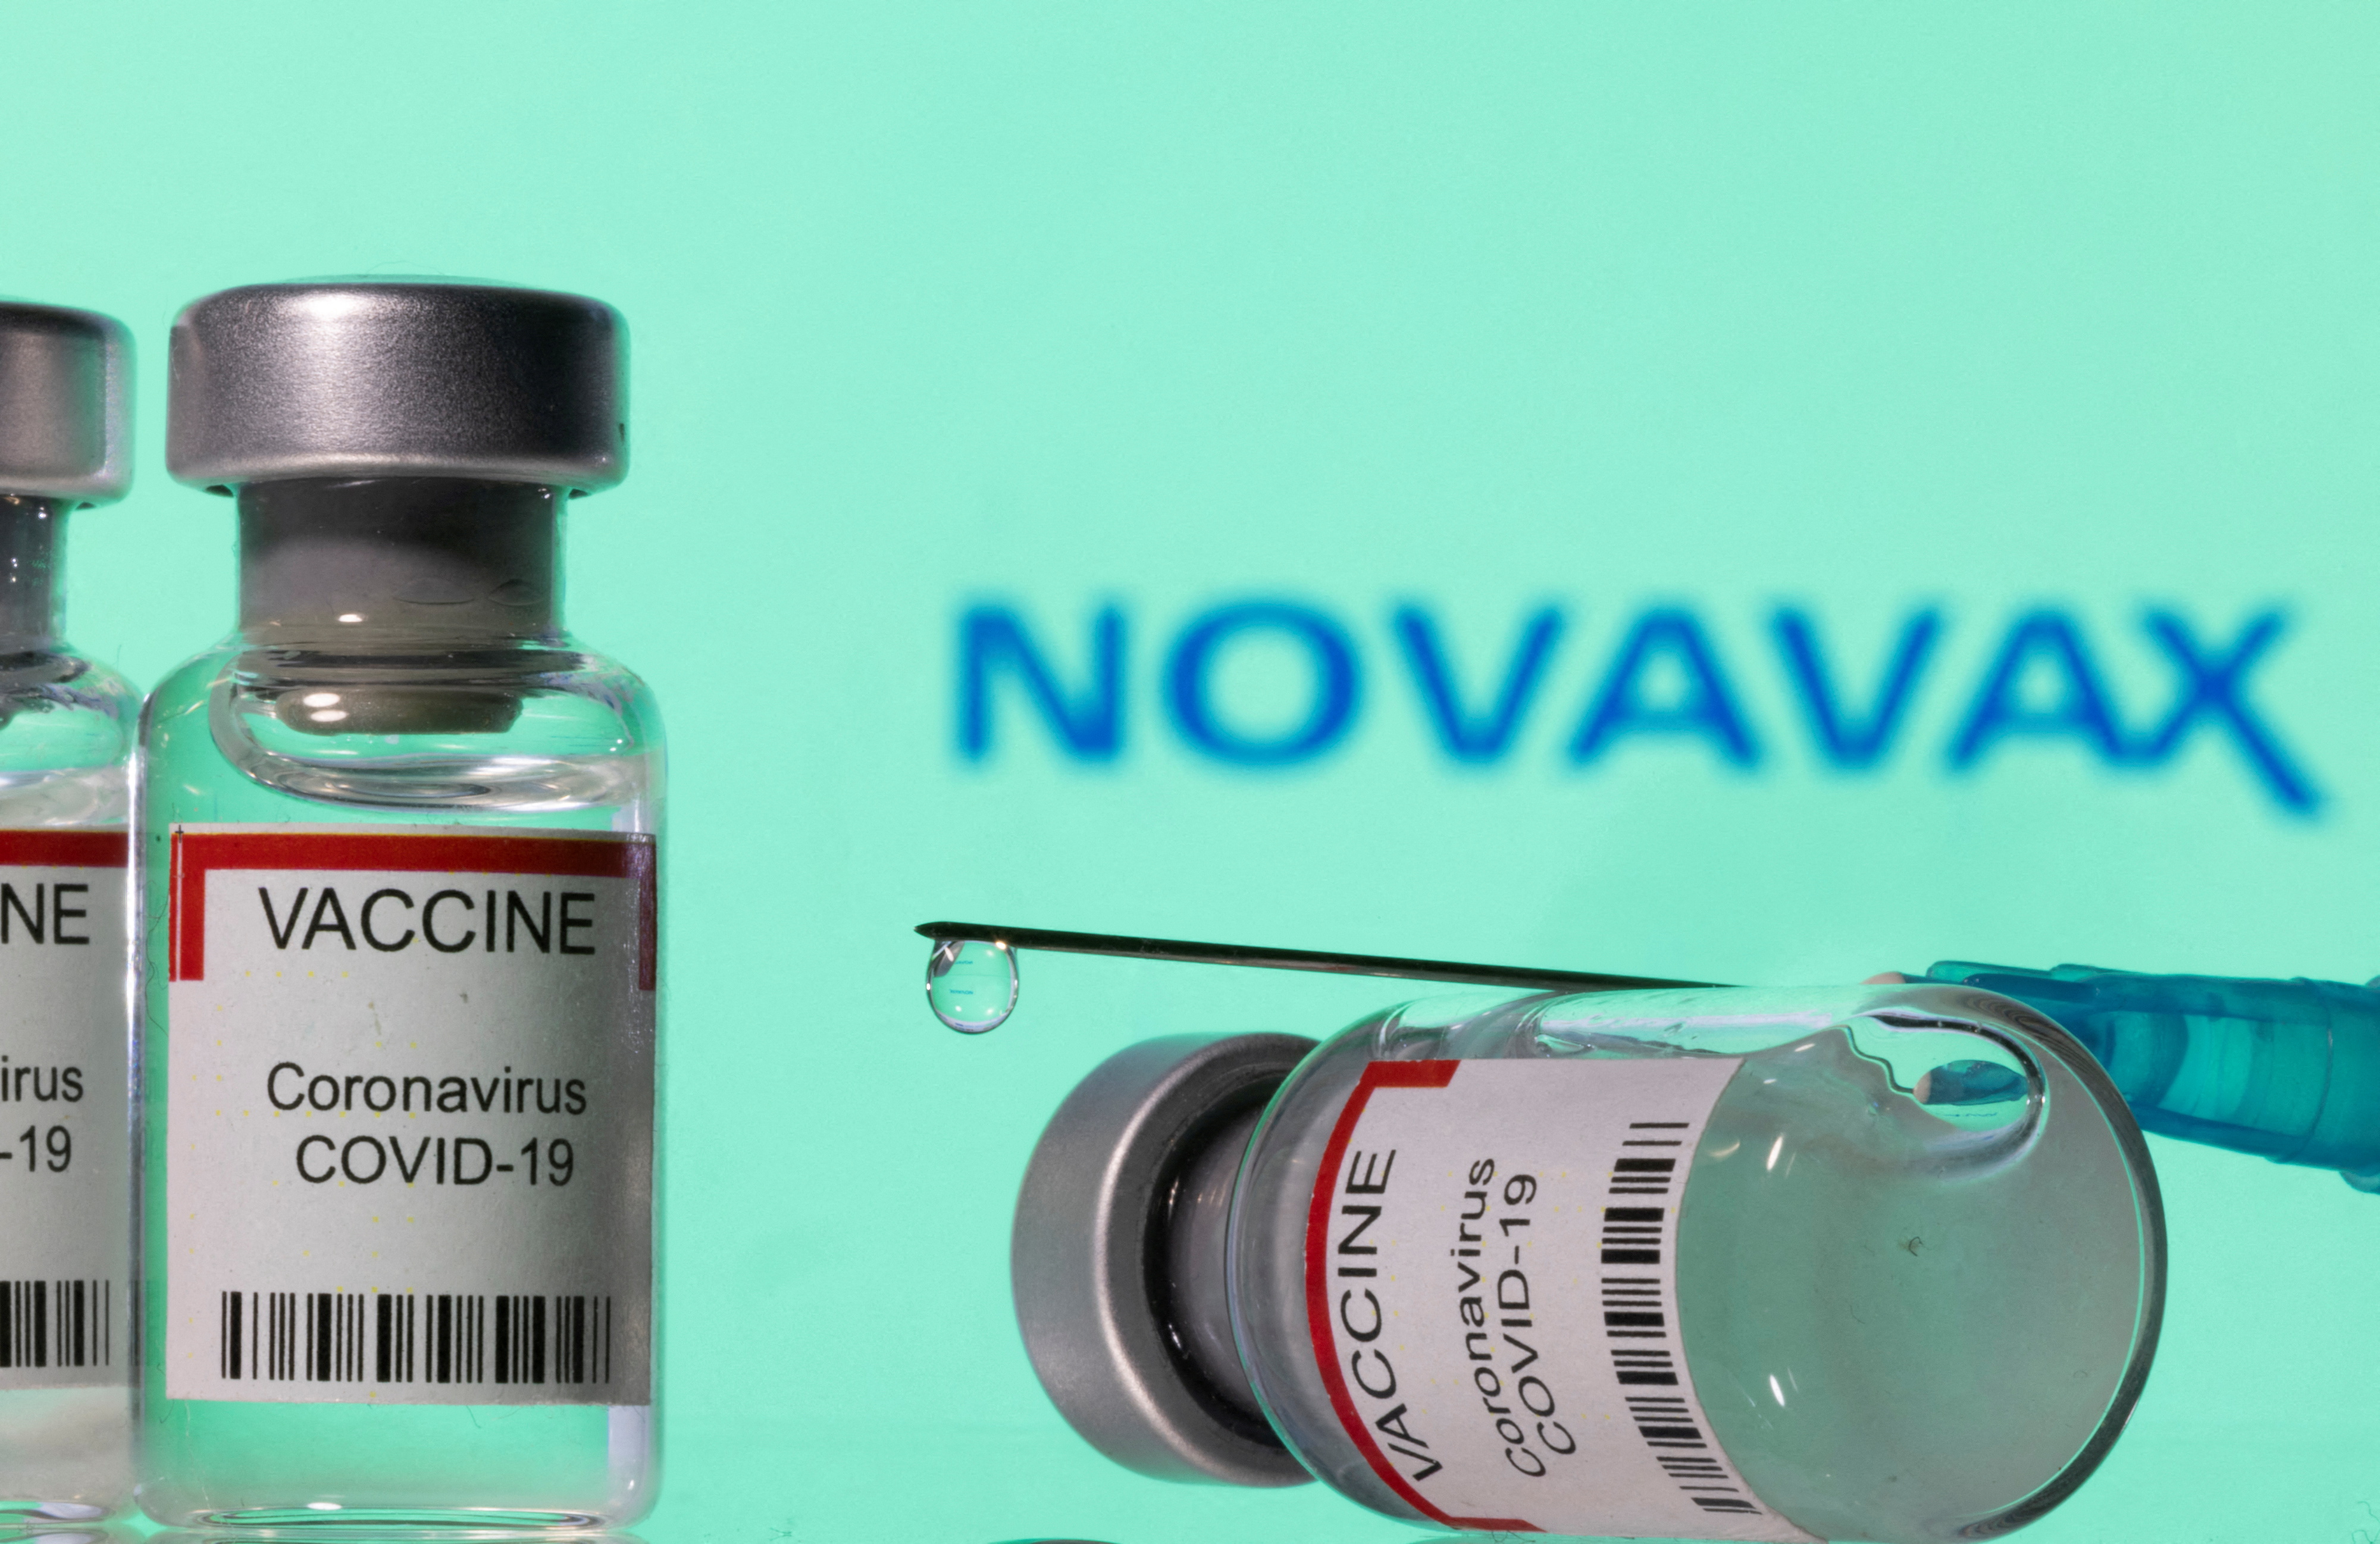 Illustration shows vials labelled "VACCINE Coronavirus COVID-19" and a syringe in front of a displayed Novavax logo